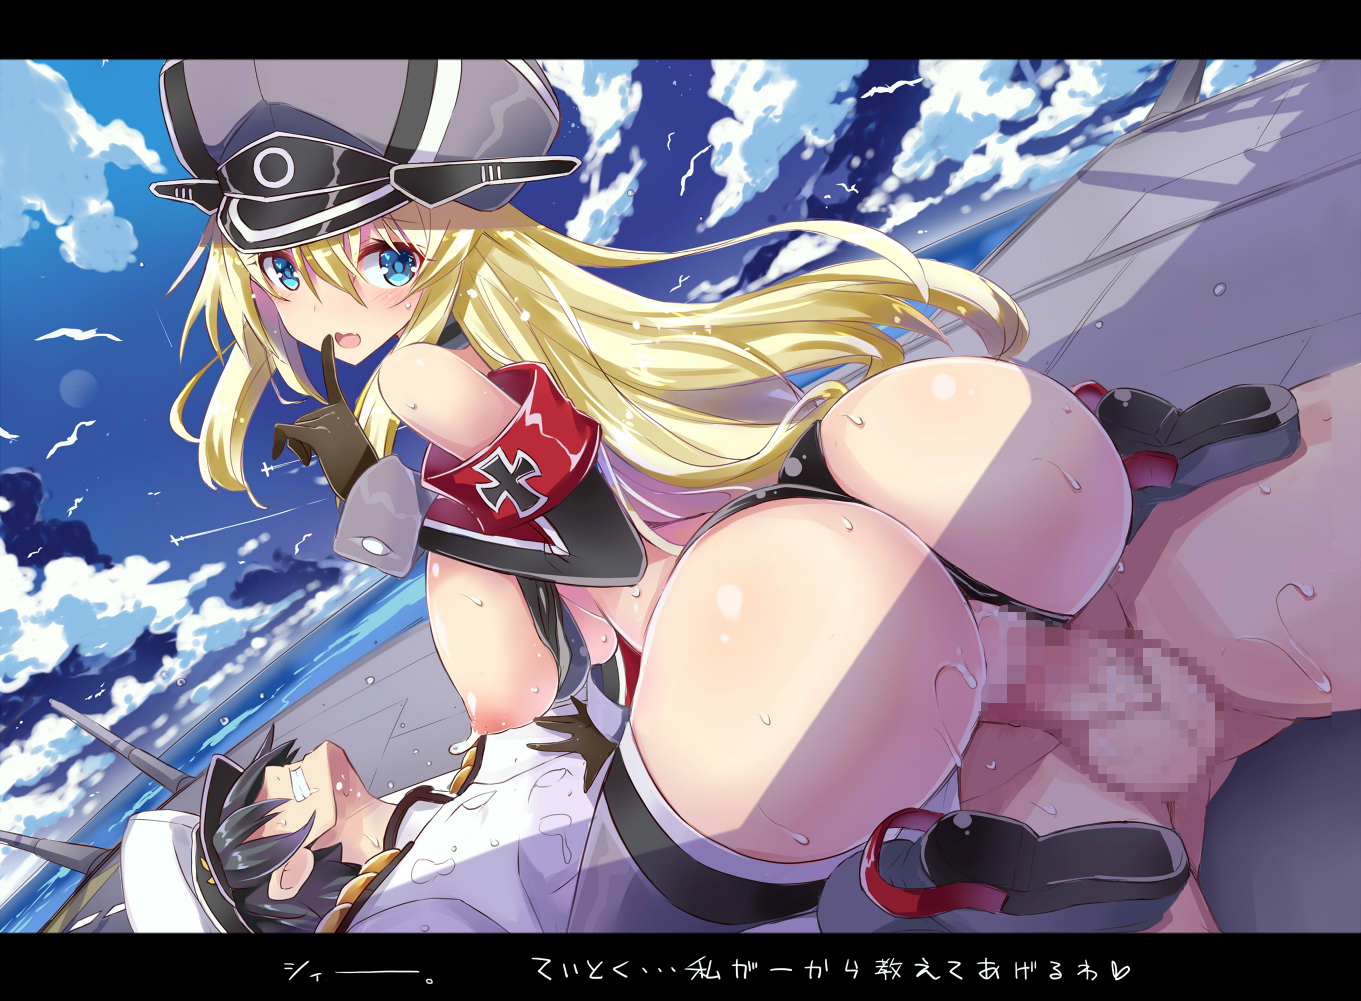 True S. recomended with admiral bismarck